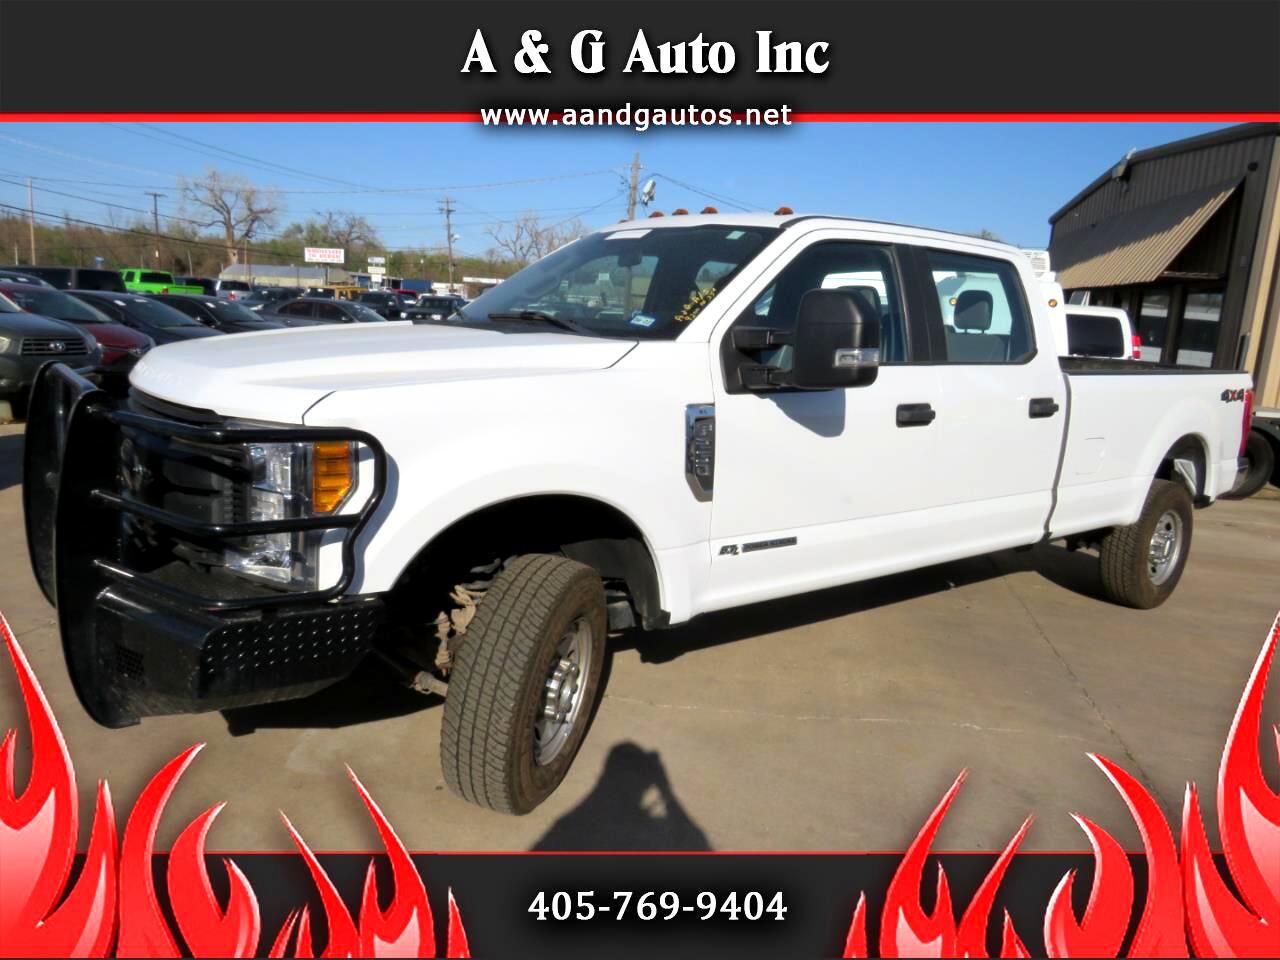 2017 Ford F-250 SD for sale in Oklahoma City OK 73141 by A & G Auto Inc